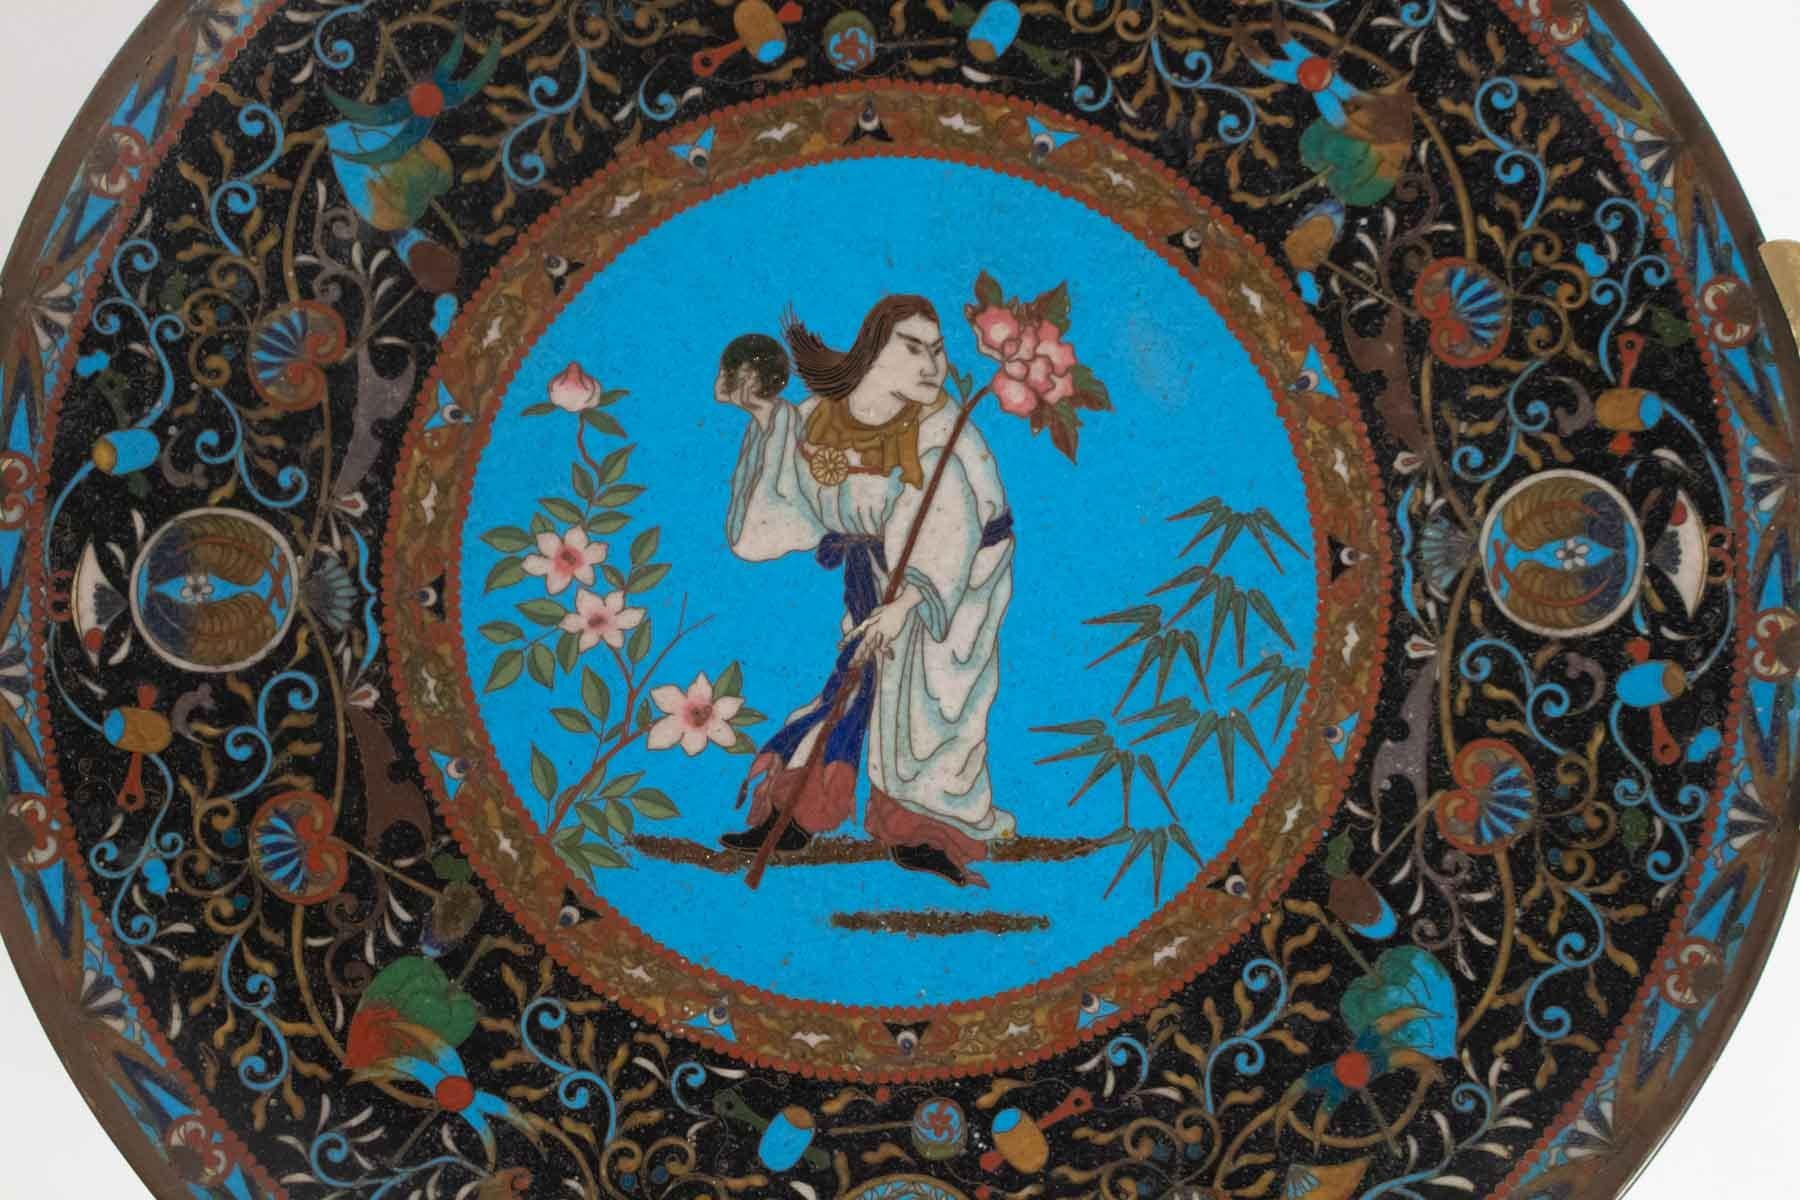 Polychrome Cloisonné Enameled Dish with Character Decor and Entrelcss Fleuris (Asiatisch)